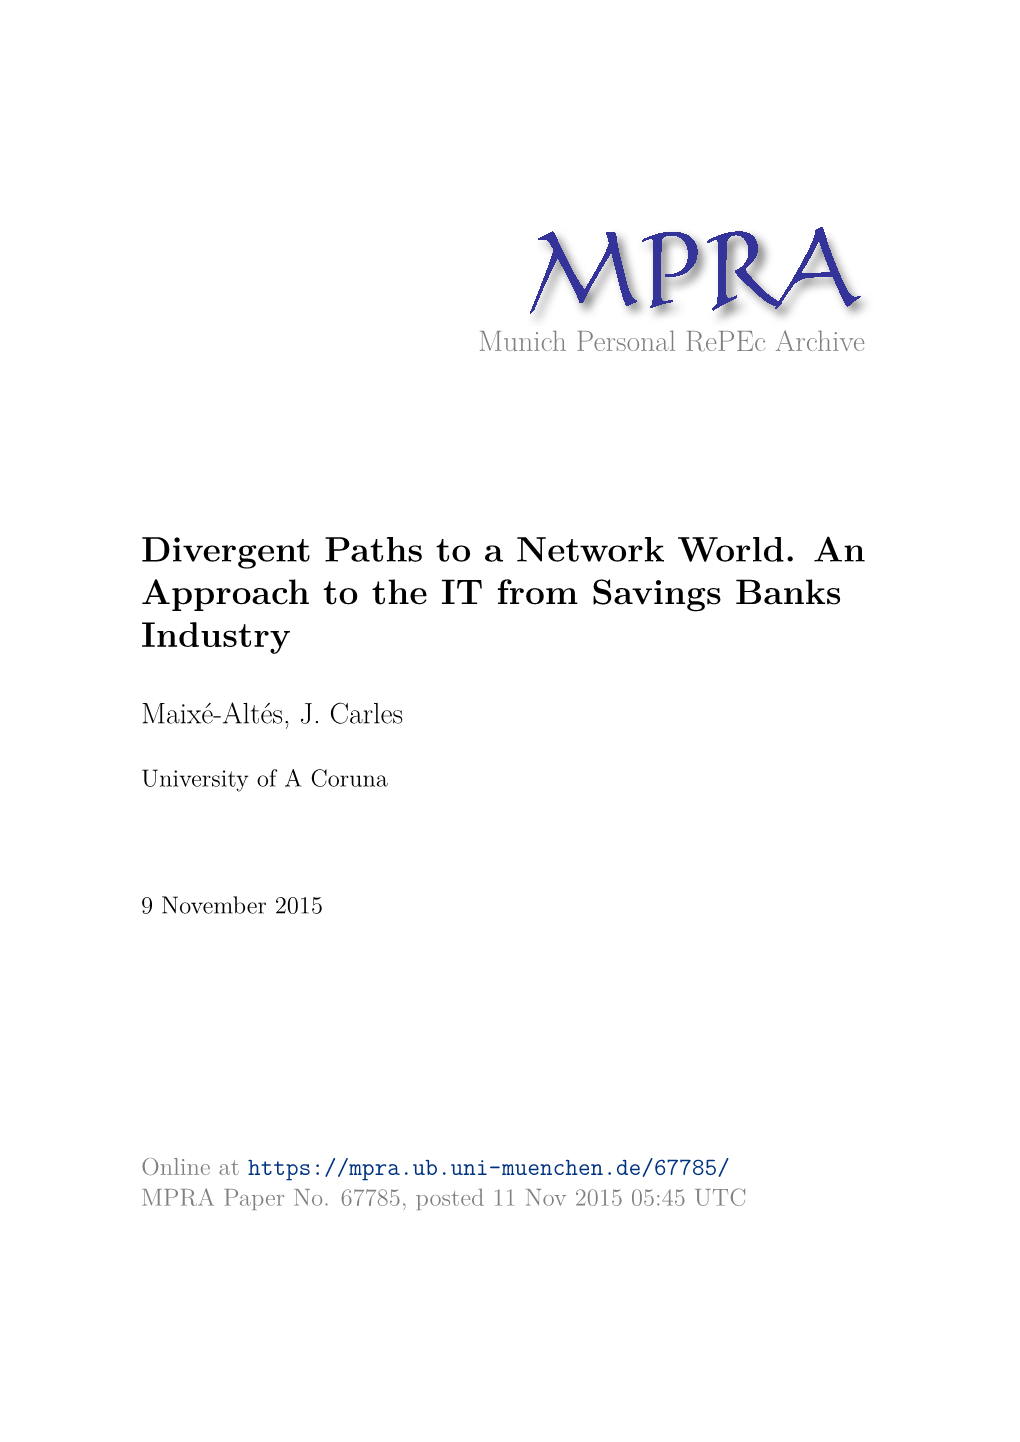 Divergent Paths to a Network World. an Approach to the IT from Savings Banks Industry